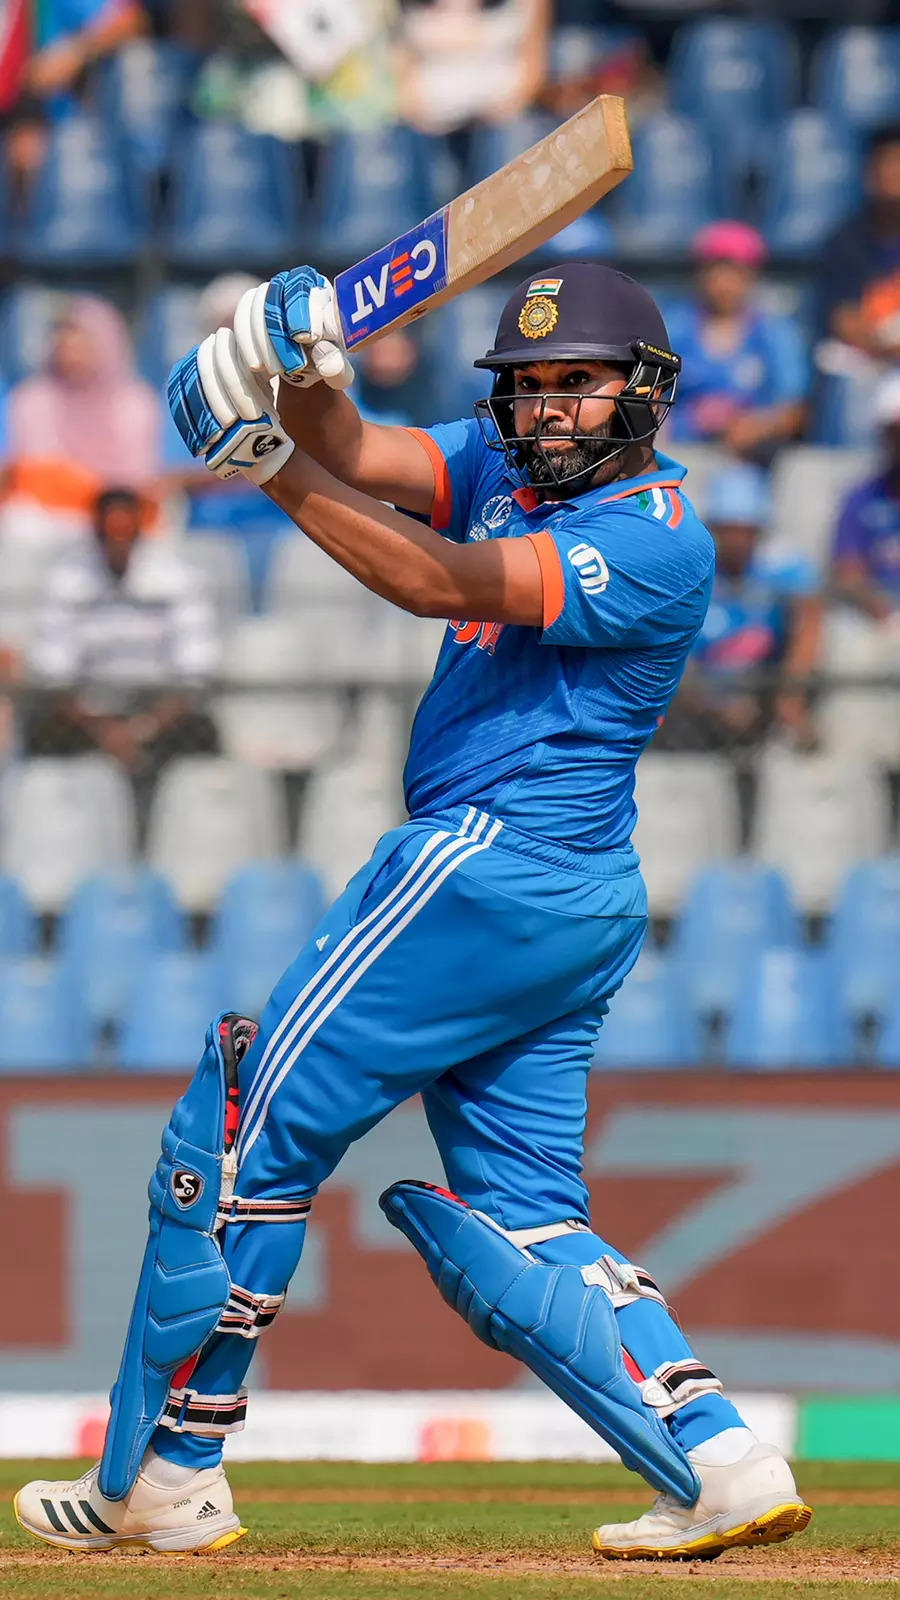 Rohit Sharma breaks record for most sixes in World Cup